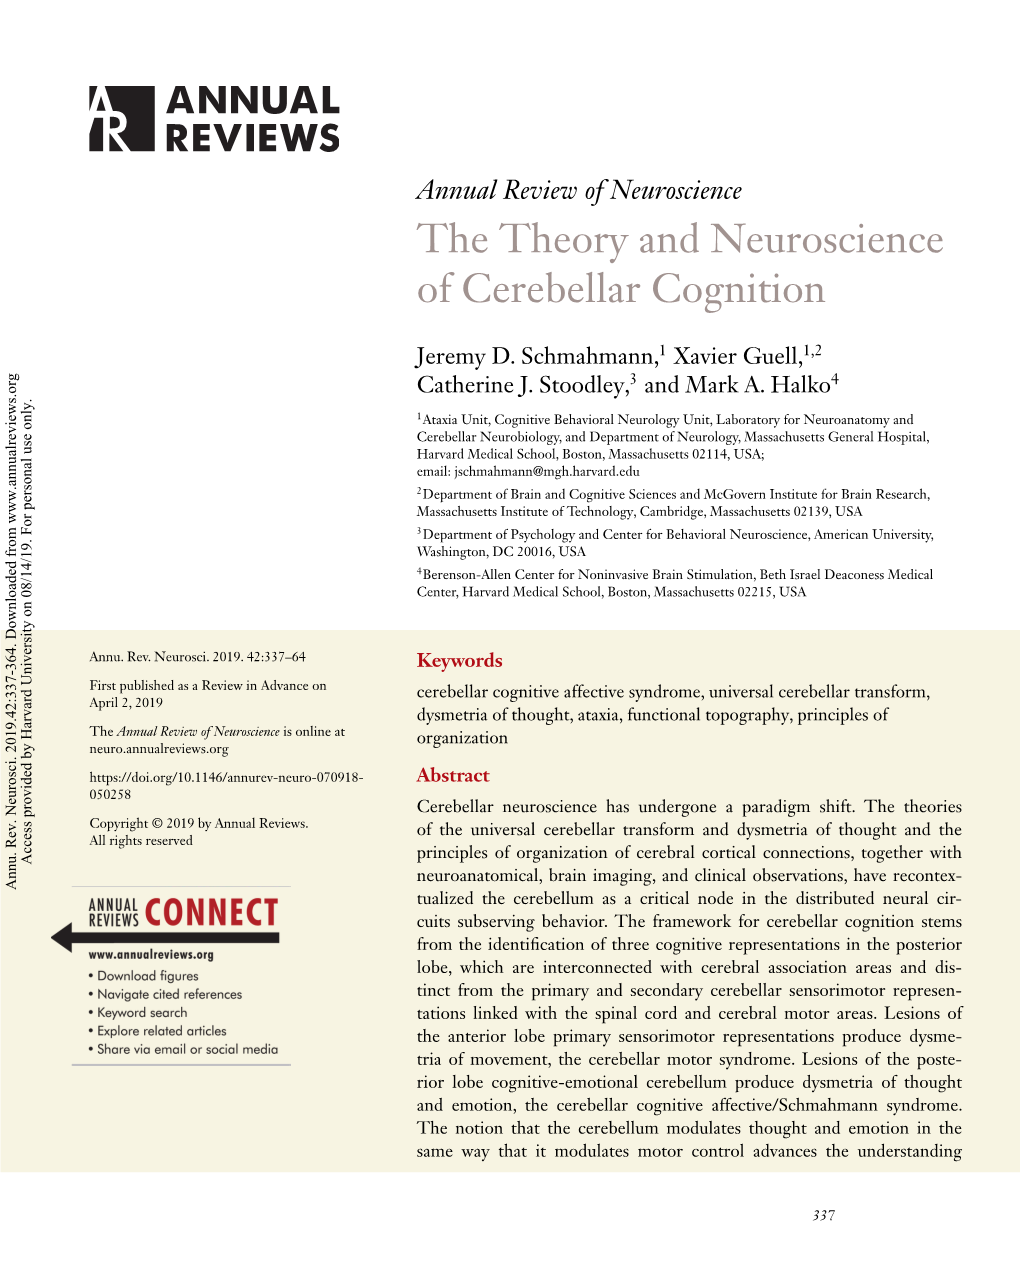 The Theory and Neuroscience of Cerebellar Cognition